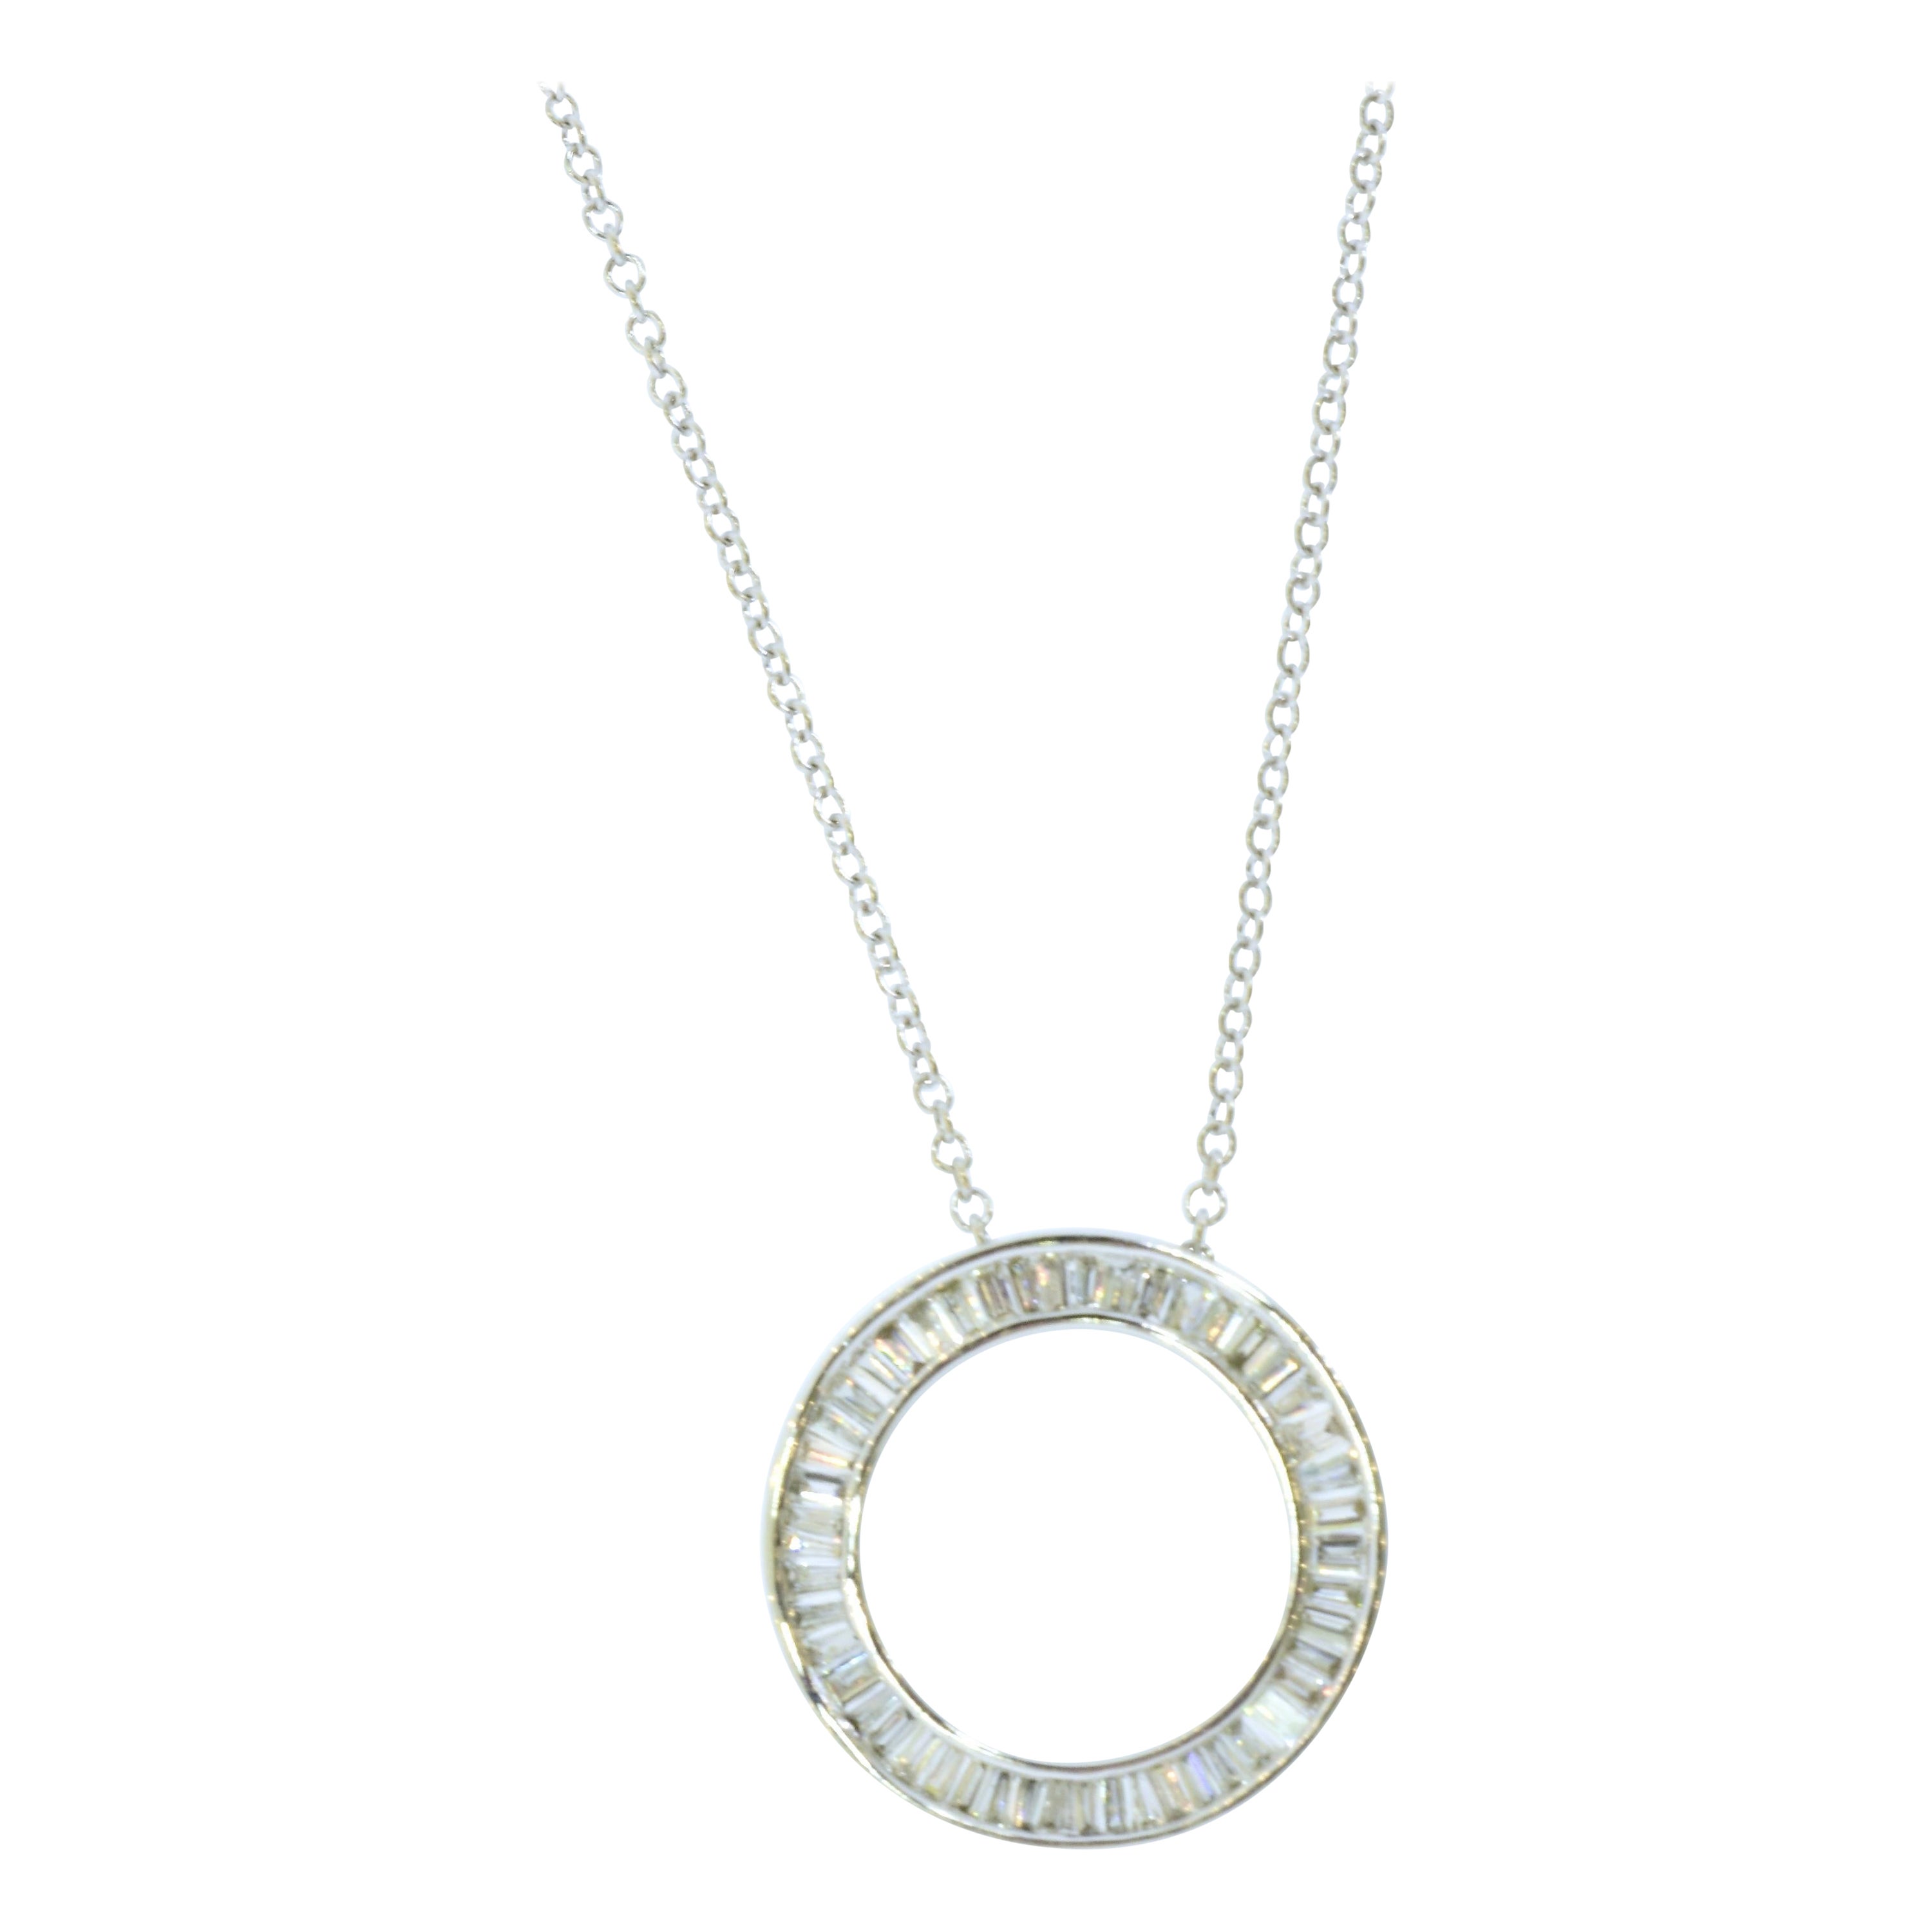 Circle of Diamond Pendant Necklace with 1.50 cts of Fine Fancy cut Diamonds